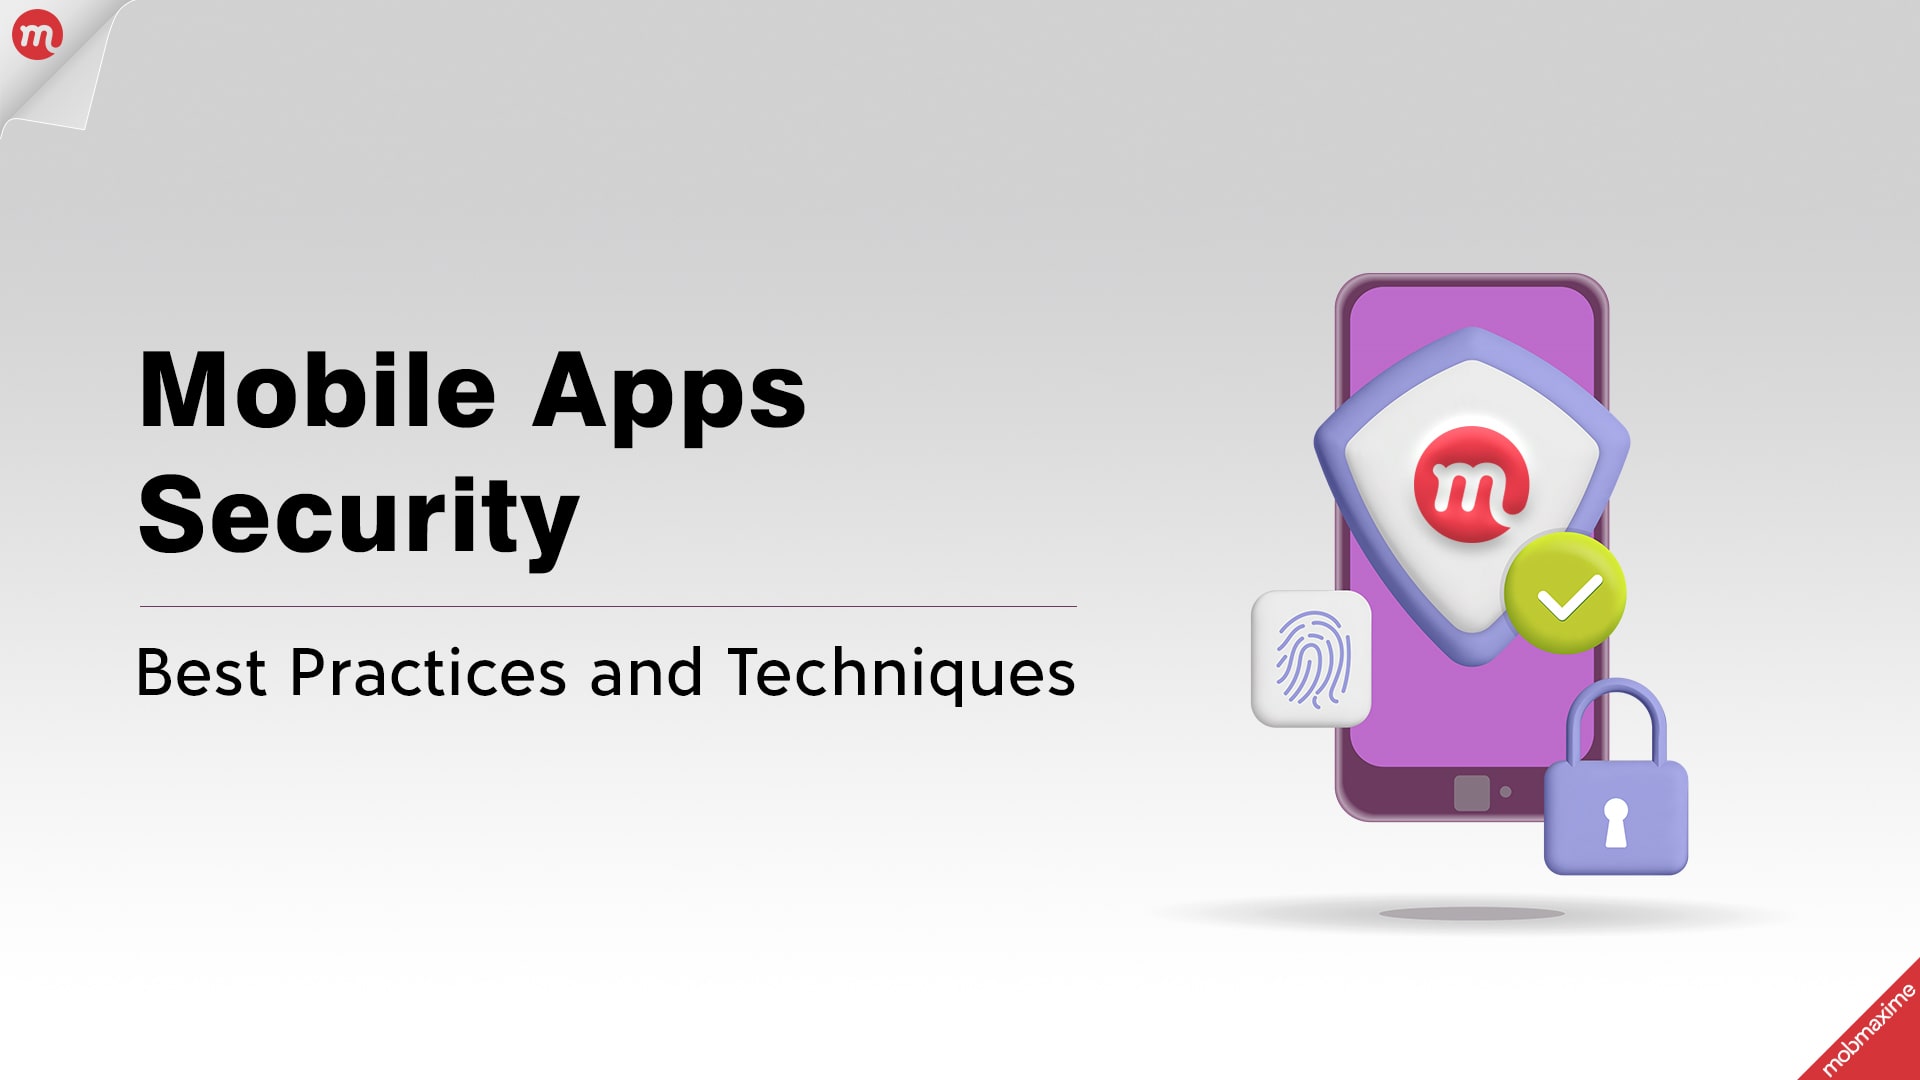 Mobile App Security: Best Practices and Techniques